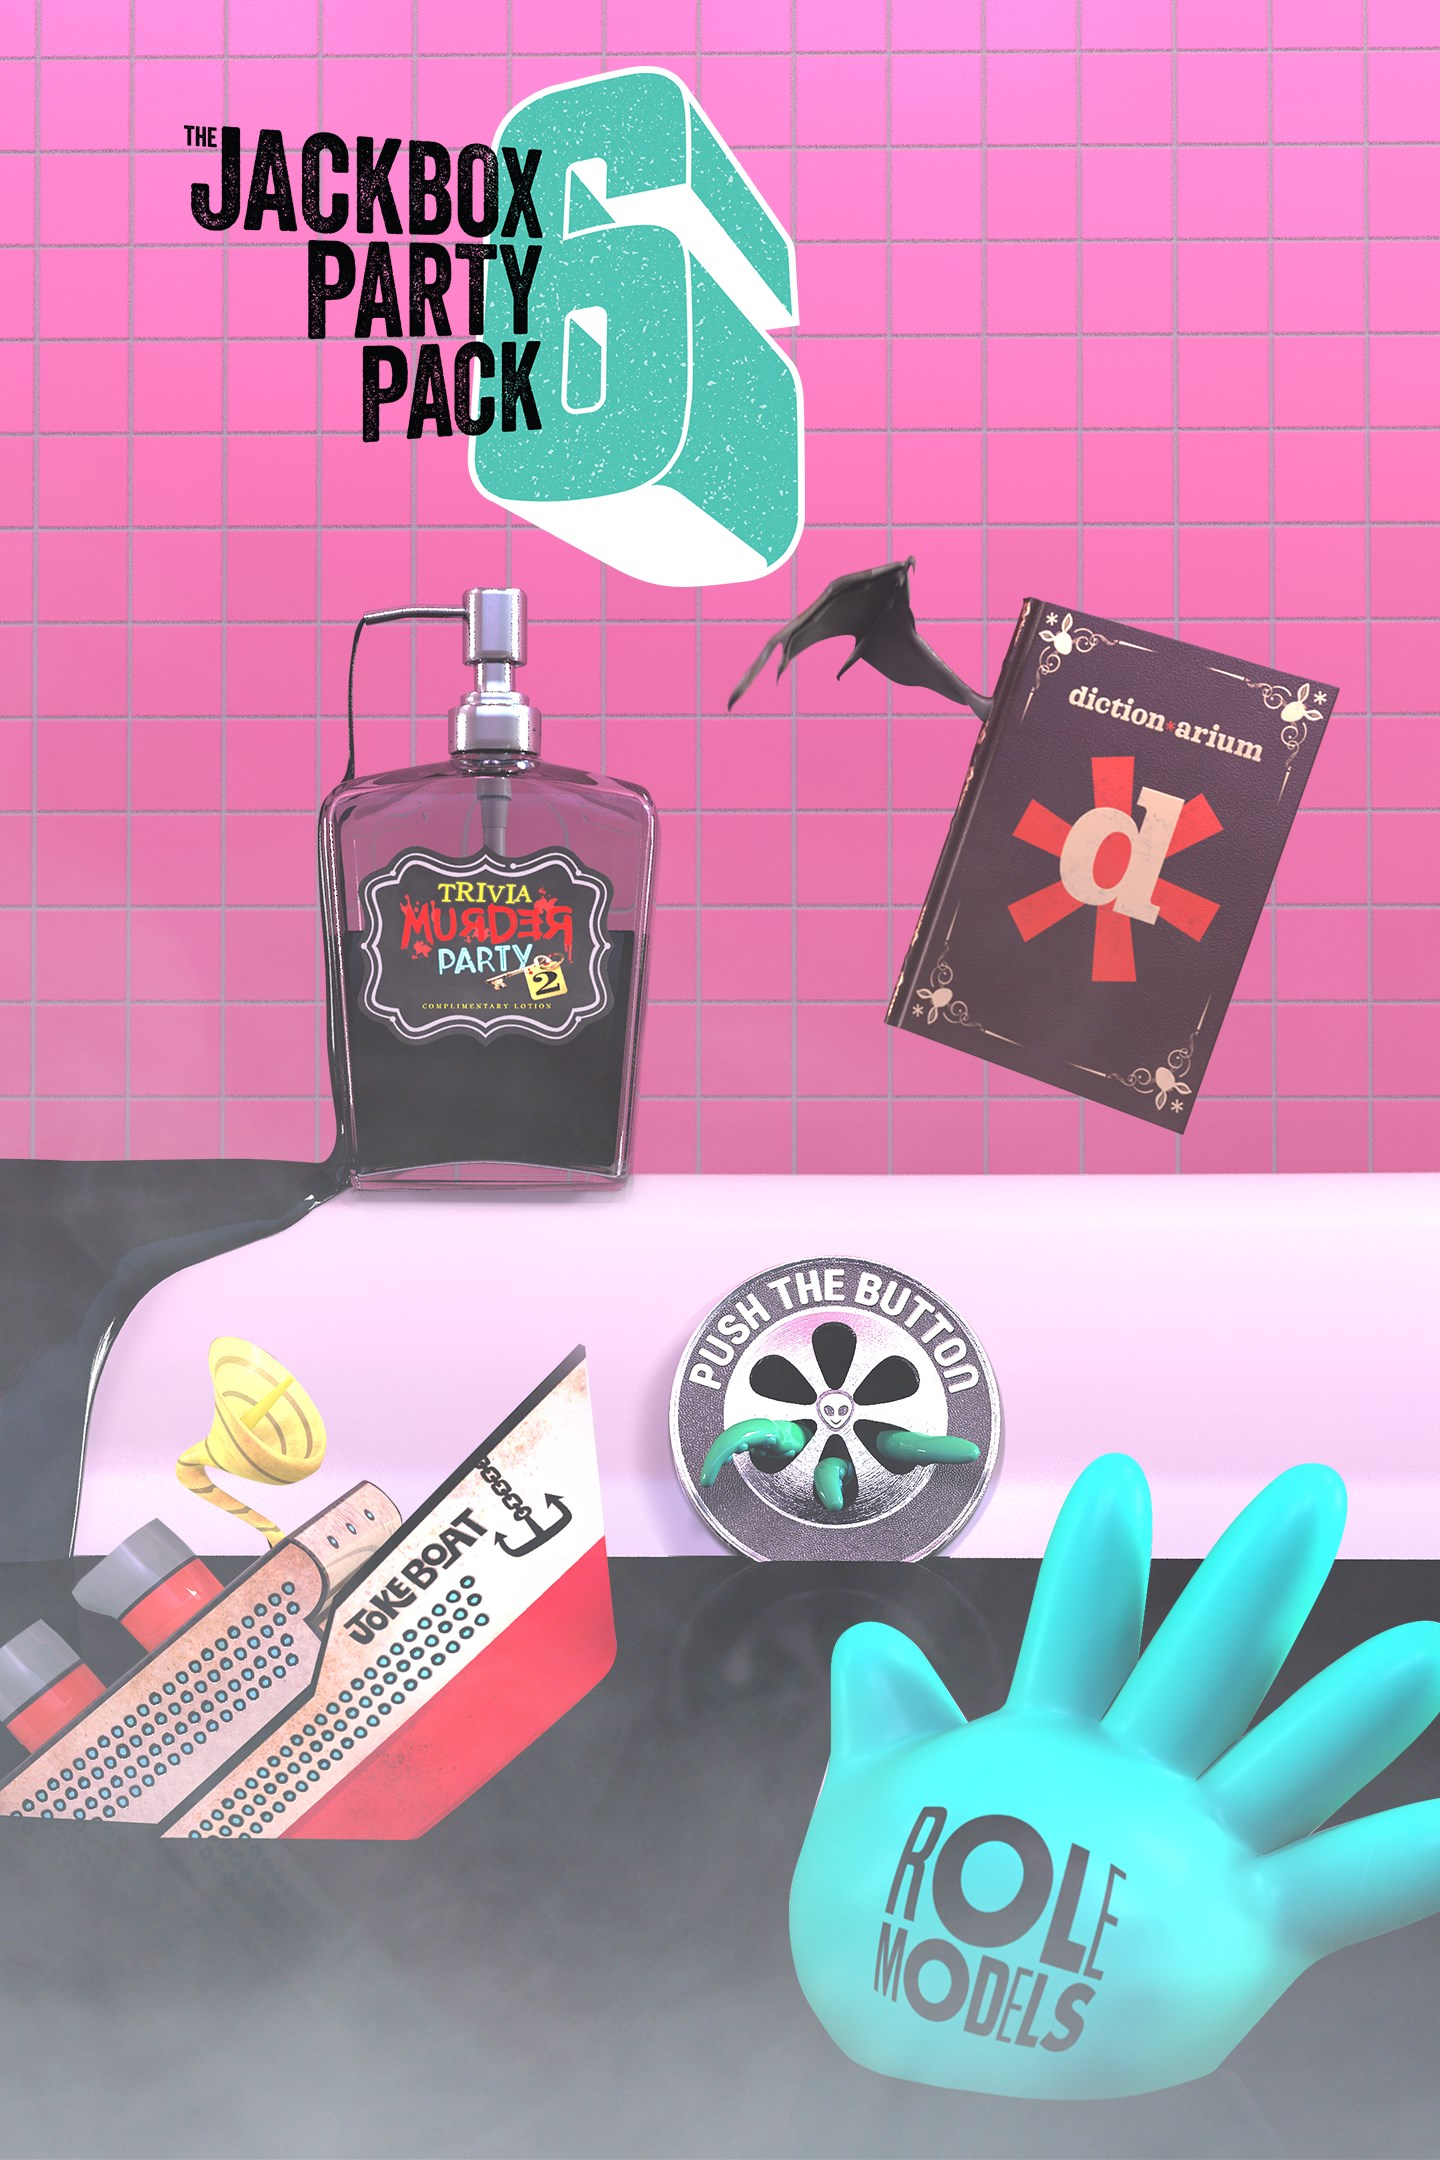 Jackbox party pack steam фото 20